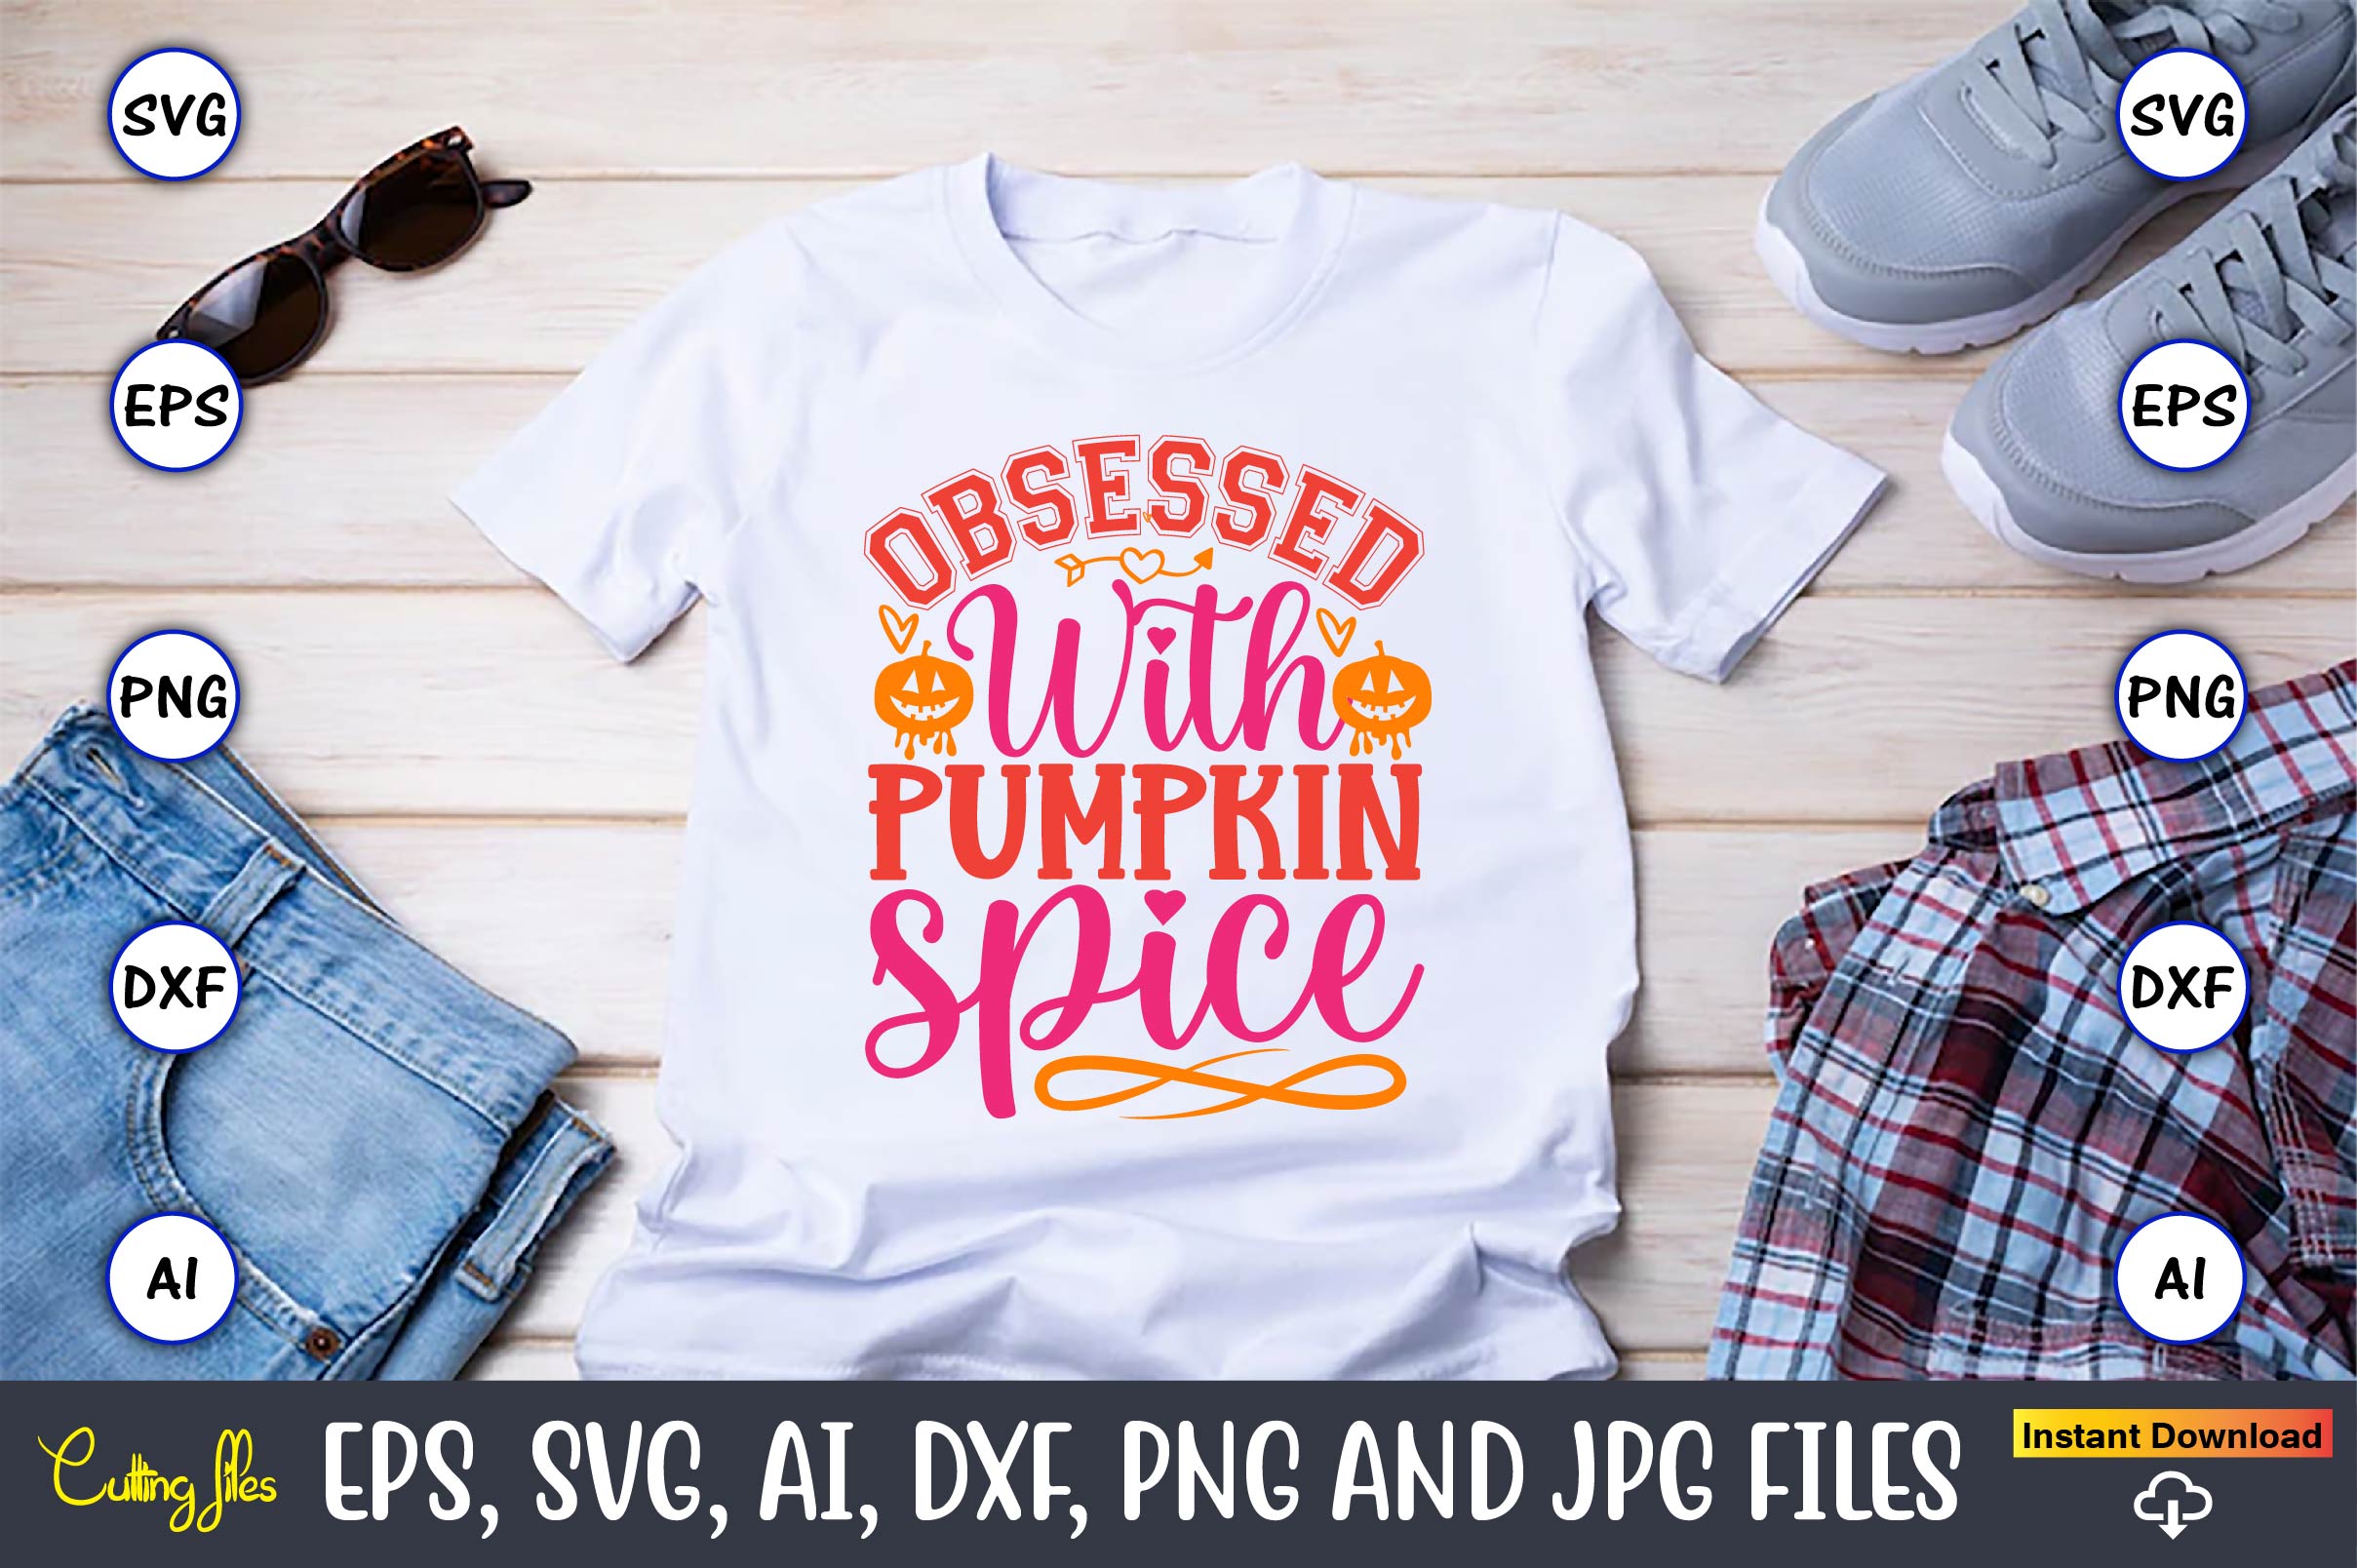 Image of a white t-shirt with a colorful slogan Obsessed with pumpkin spice.